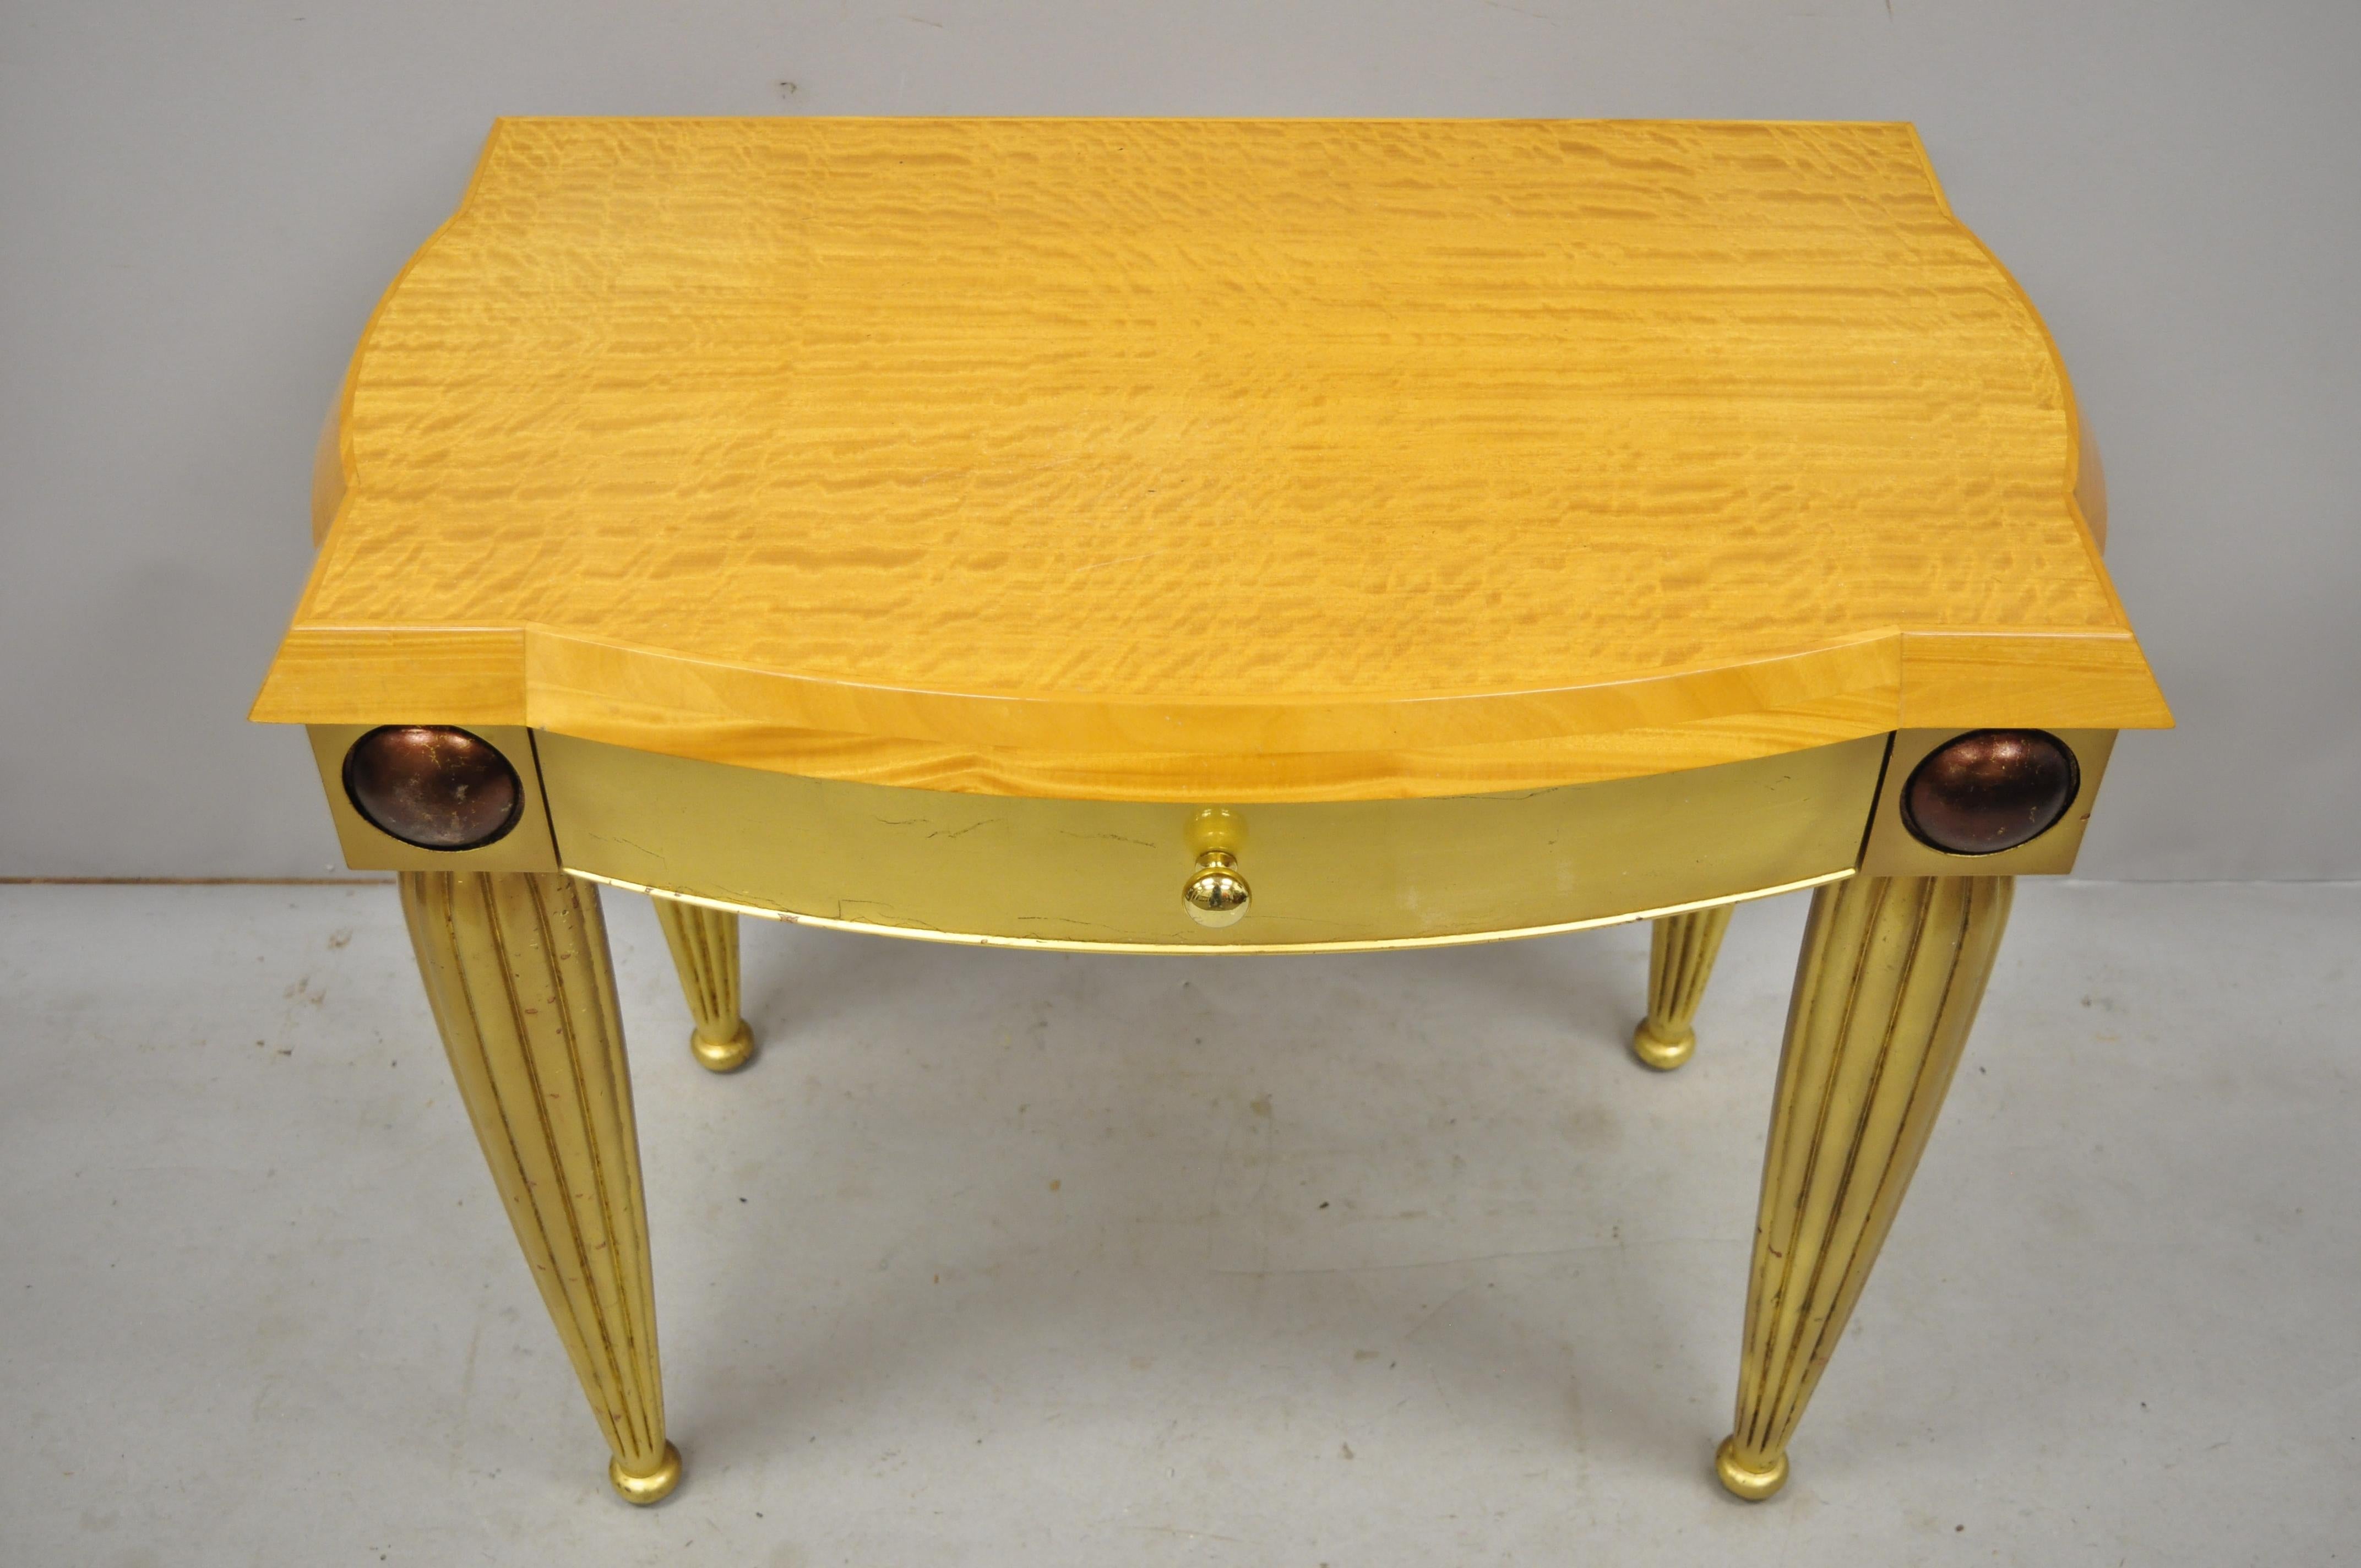 Italian Hollywood Regency curly maple gold gilt leaf 1 drawer console hall table. Item features curly maple top, gold leaf finish to base, beautiful wood grain, distressed finish, 1 drawer, solid brass hardware, great Italian craftsmanship, great